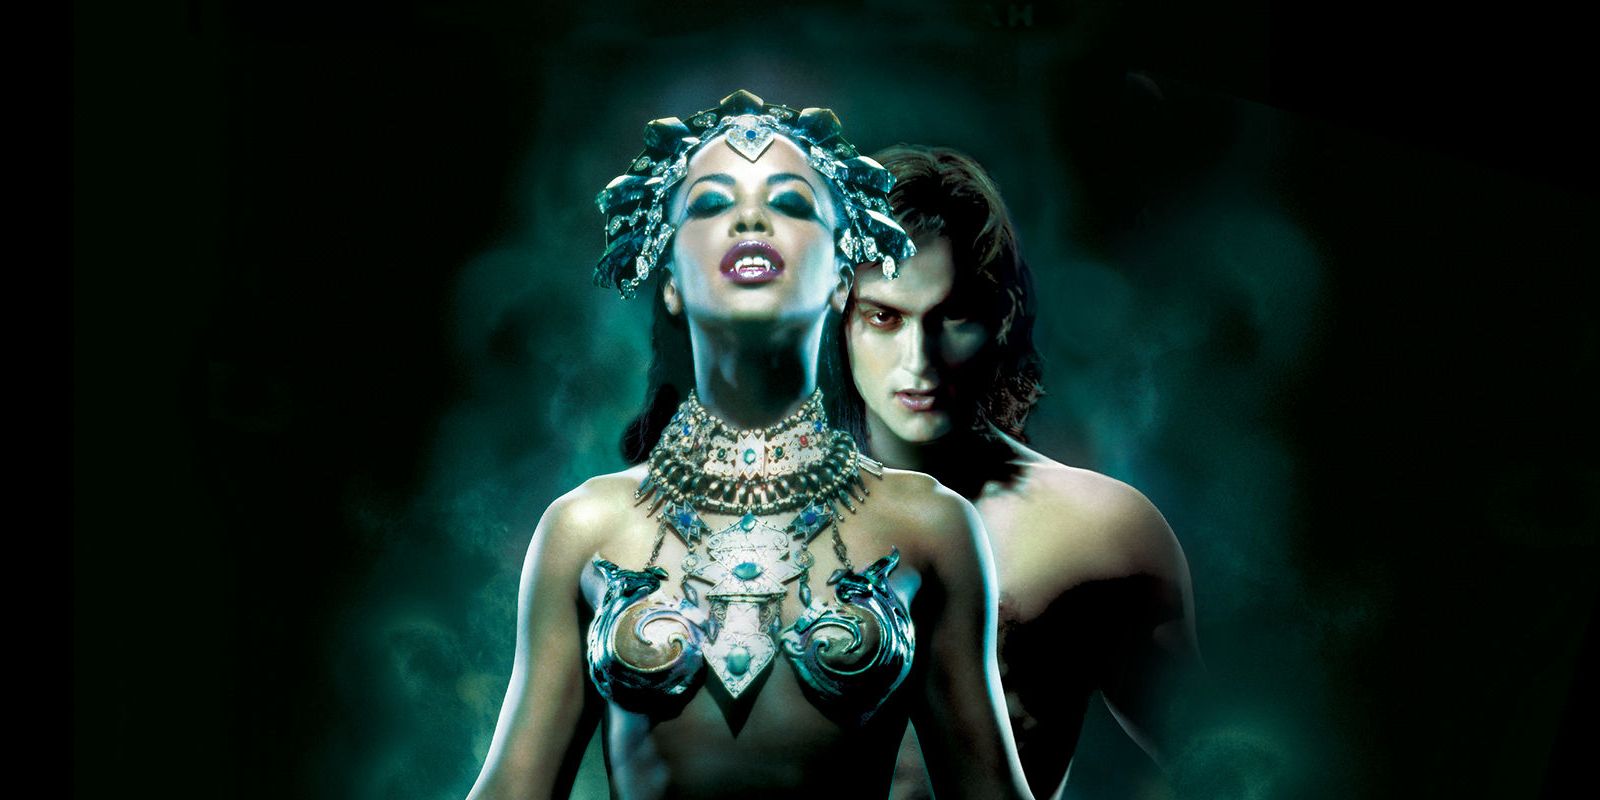 Akasha appears revived in a promotional poster for Queen Of The Damned